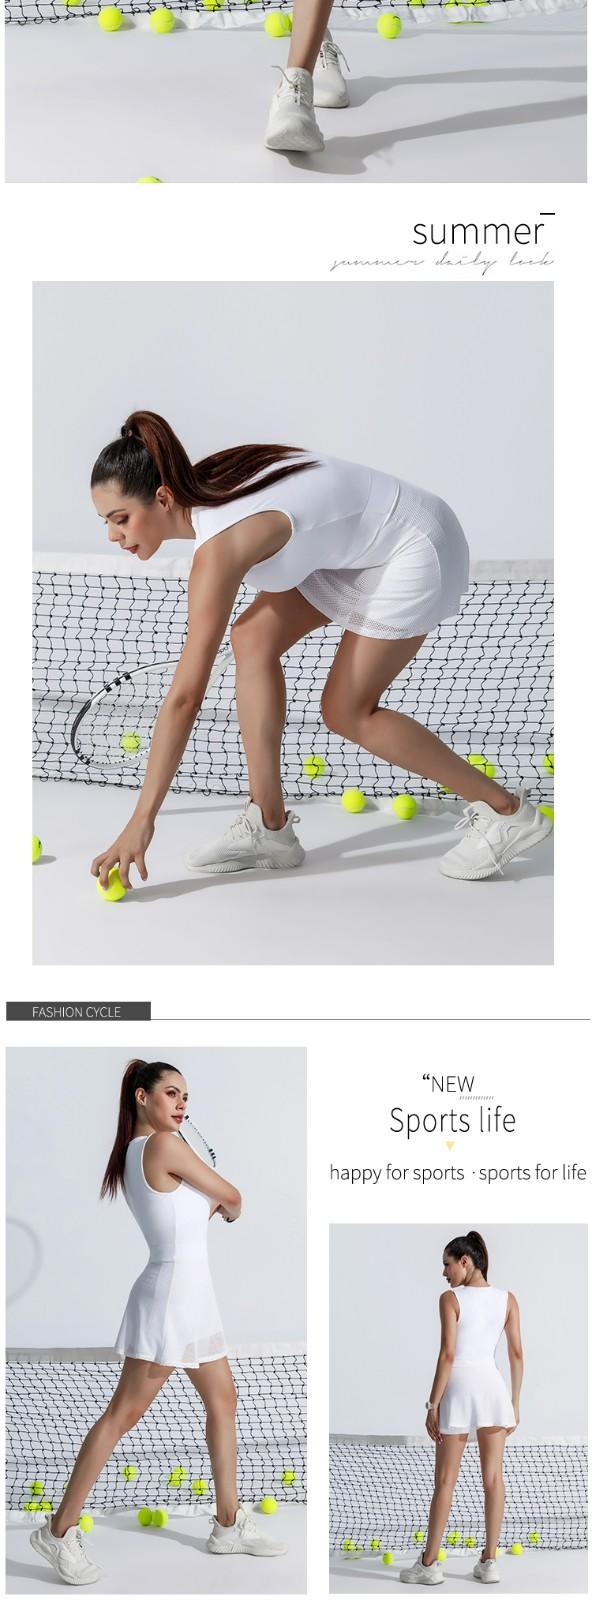 INGOR personalized tennis ladies clothing owner for sport